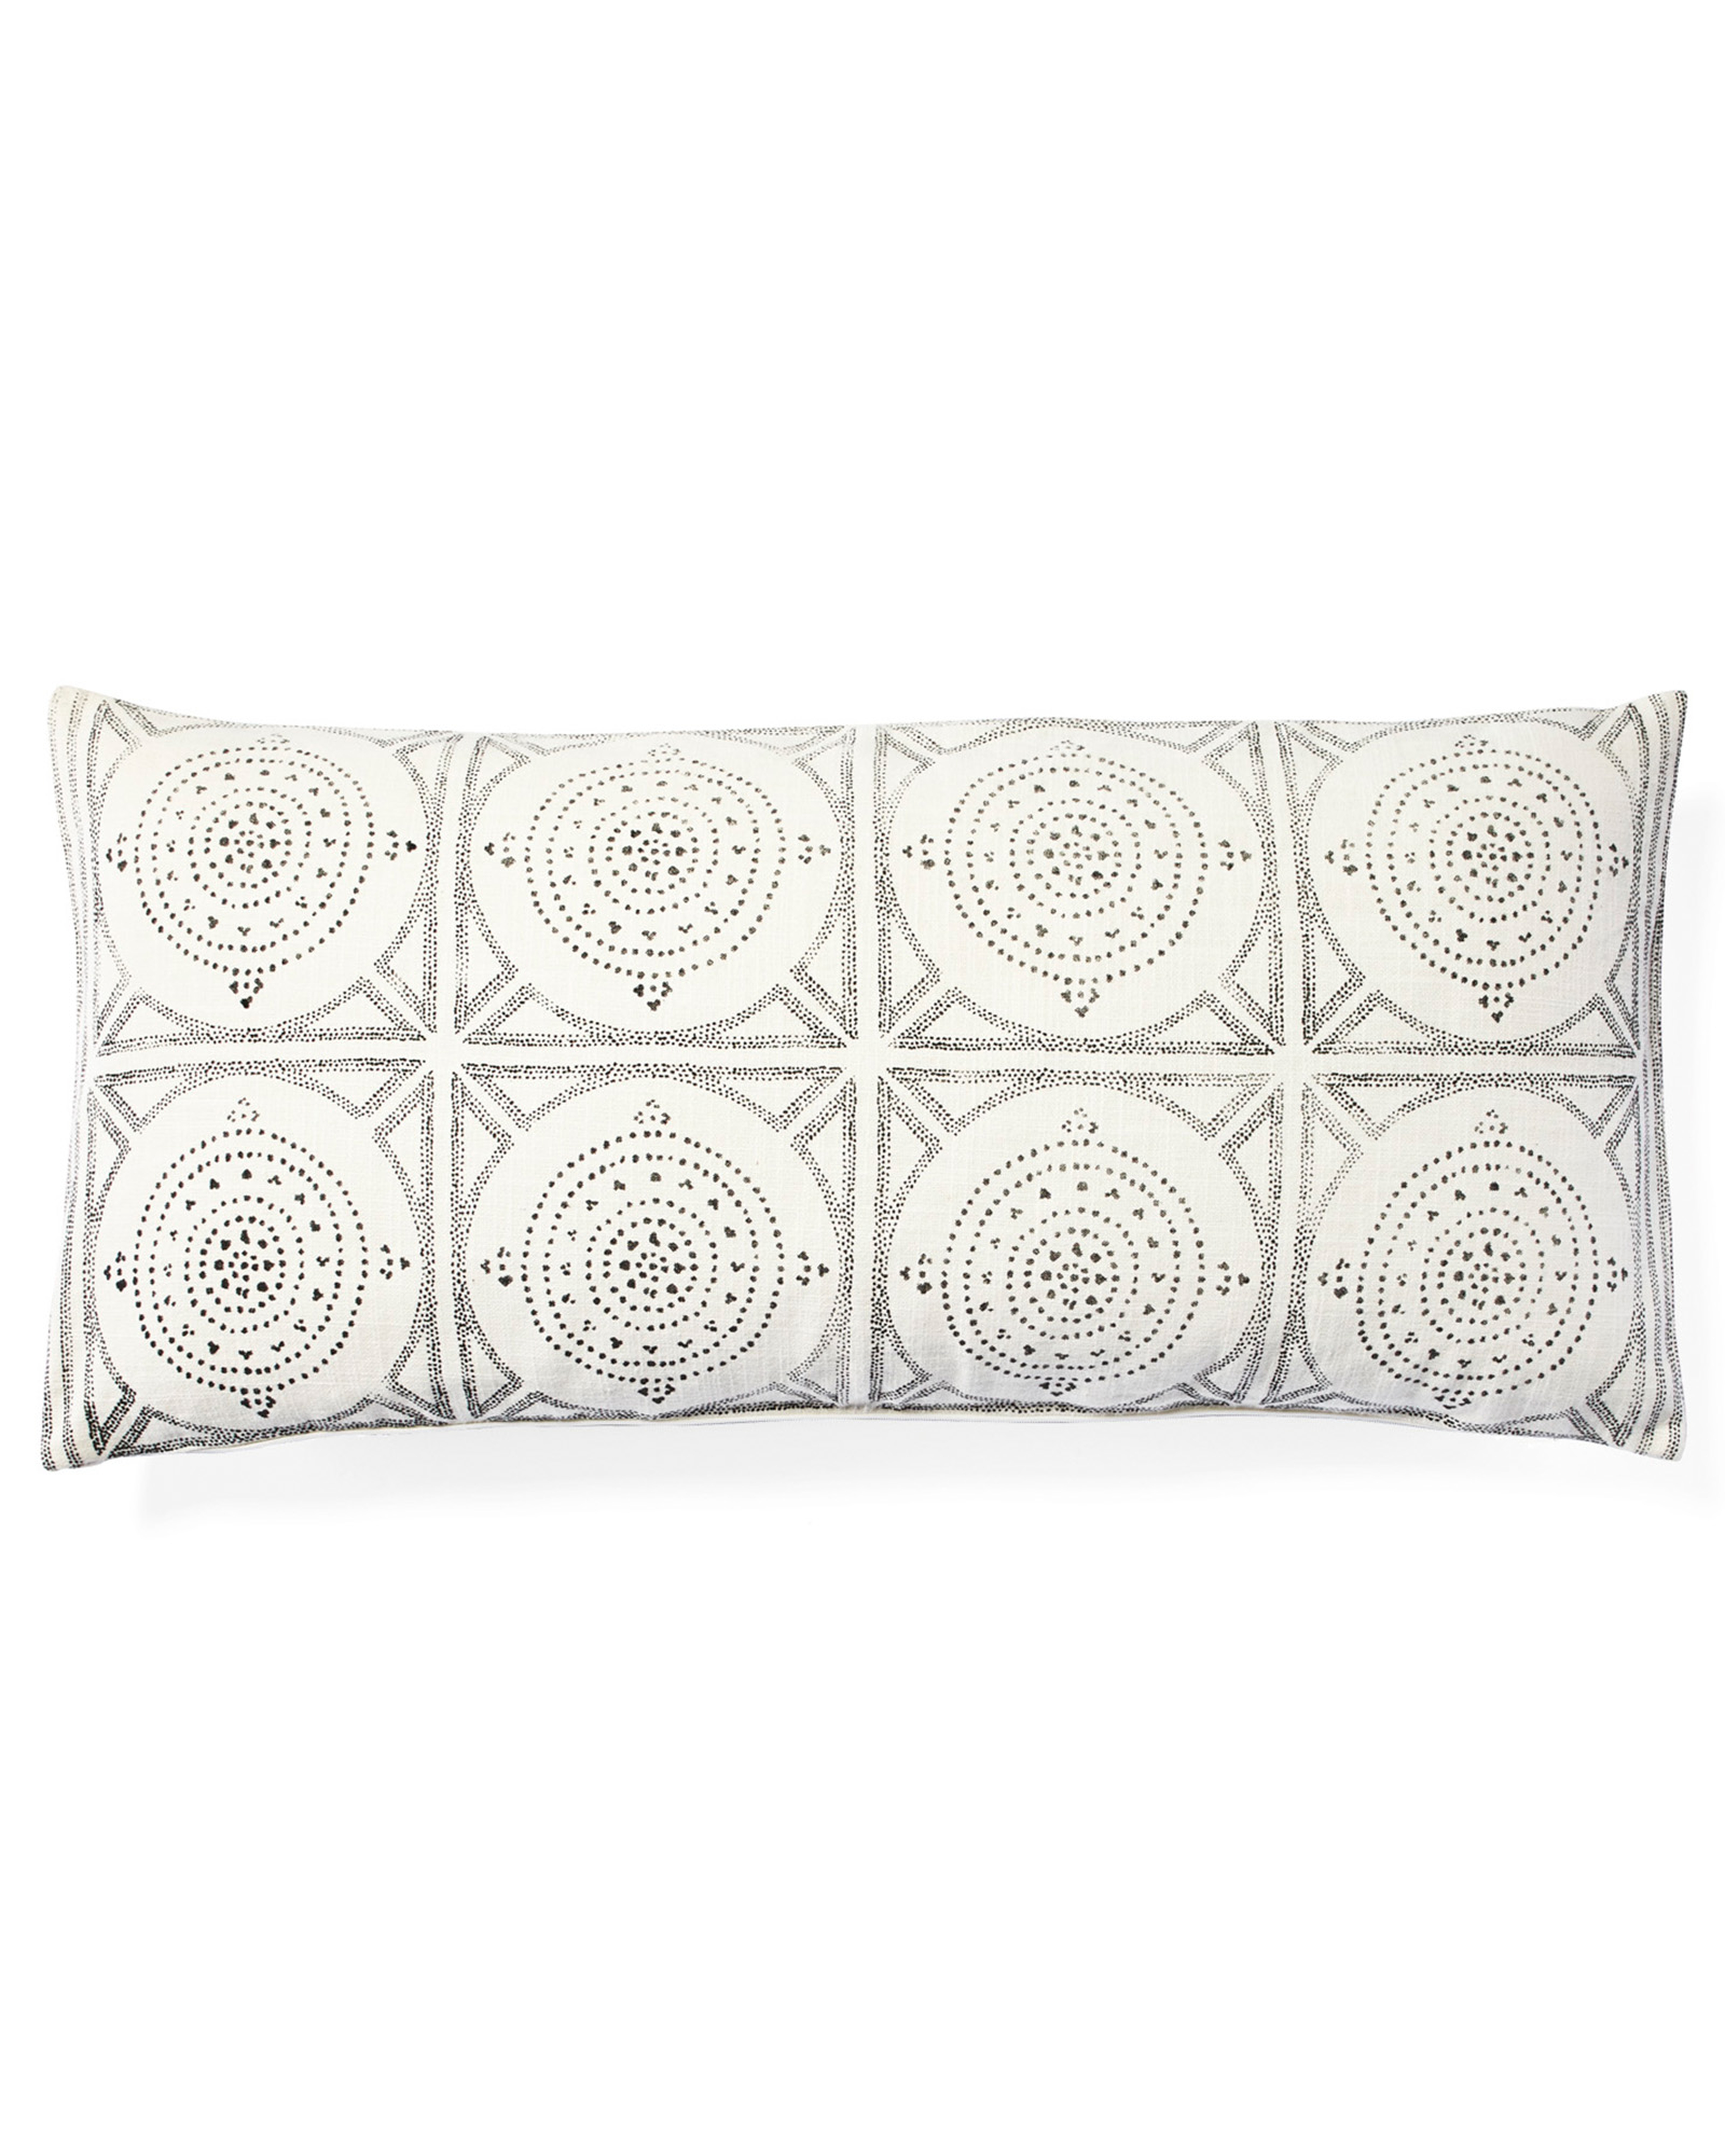 Camille Mosaic Lumbar Pillow Cover, Ivory, 30" x 14" - Serena and Lily